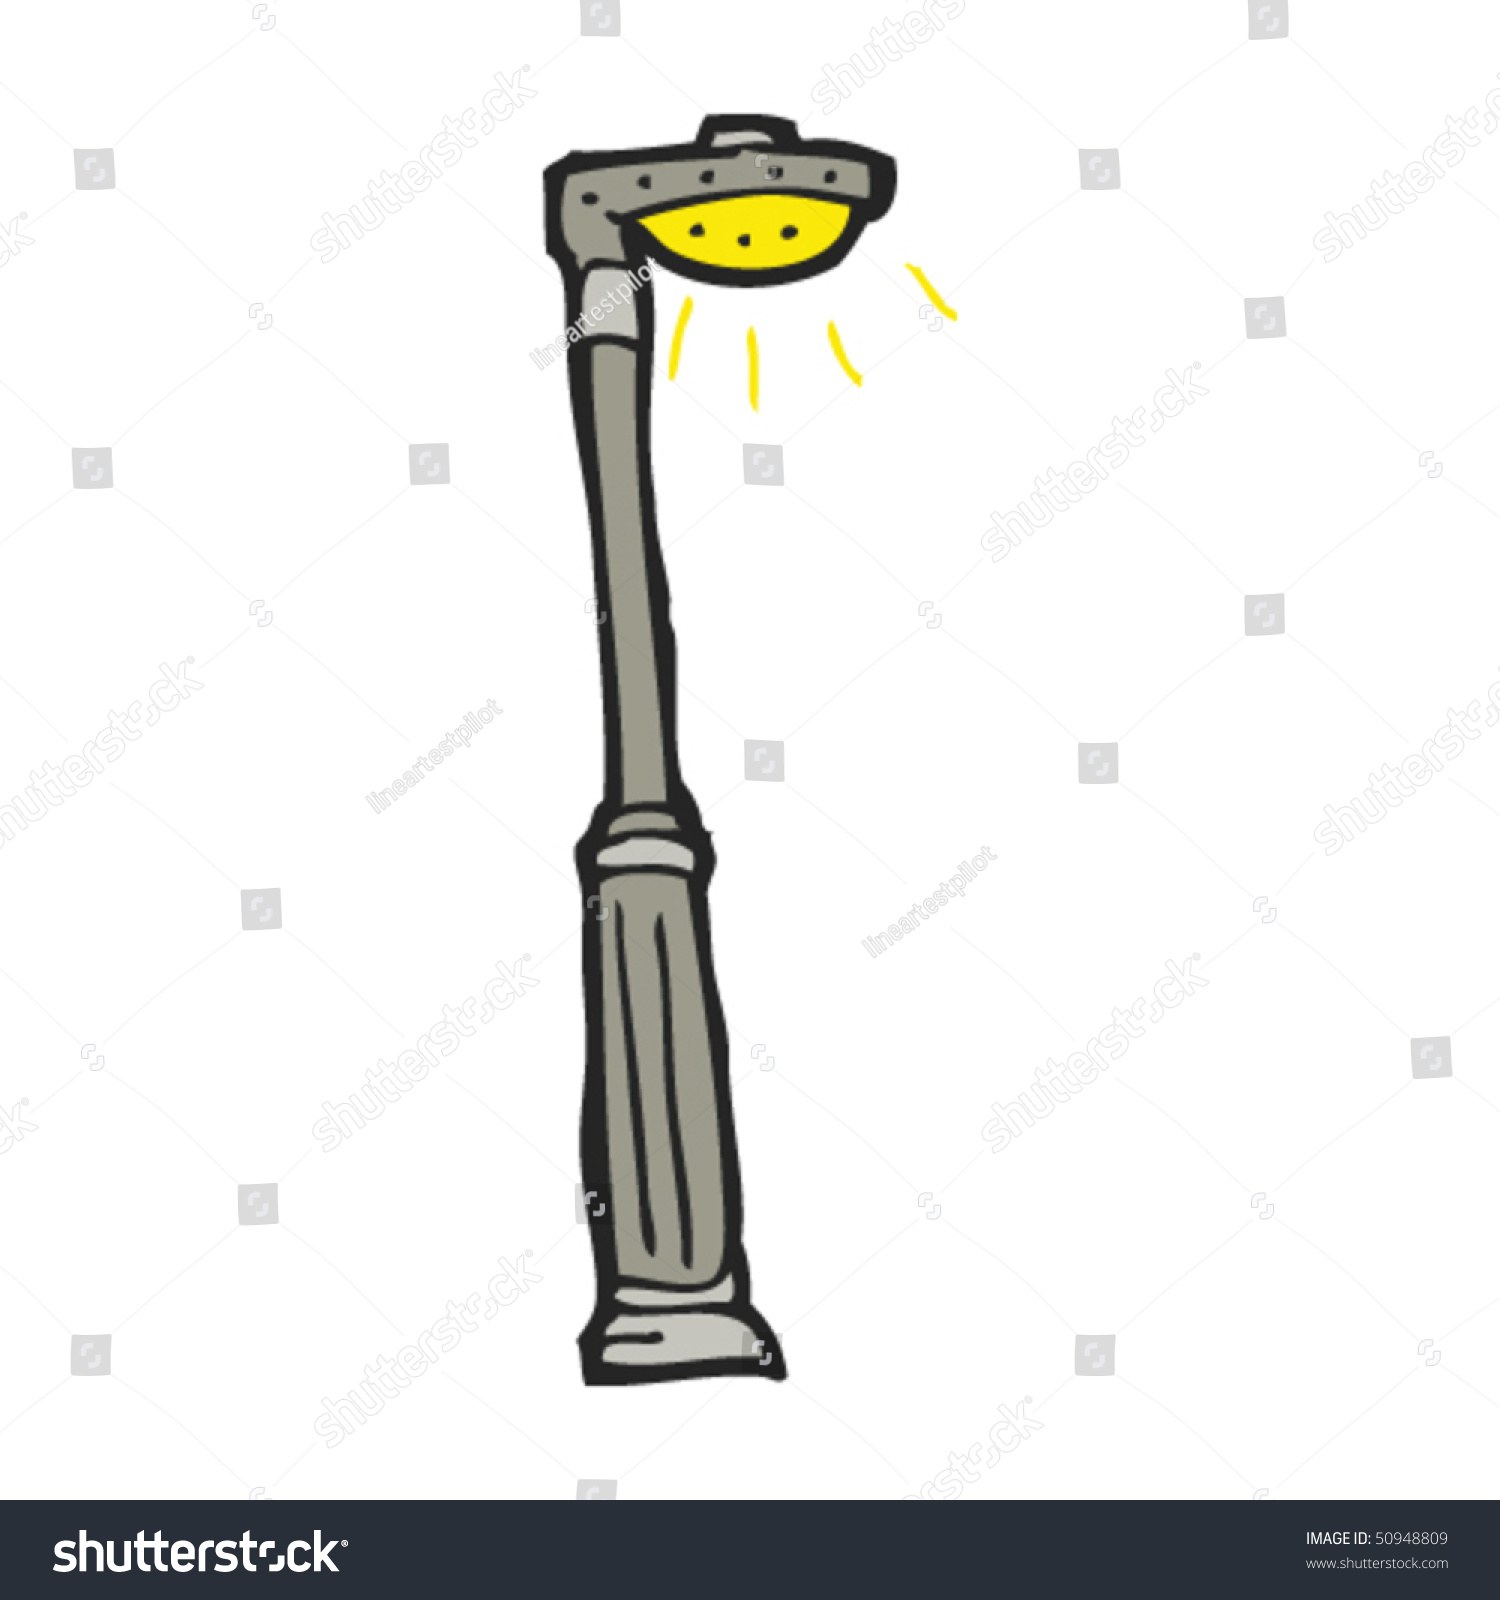 Quirky Drawing Lamppost Stock Vector (Royalty Free) 50948809 | Shutterstock